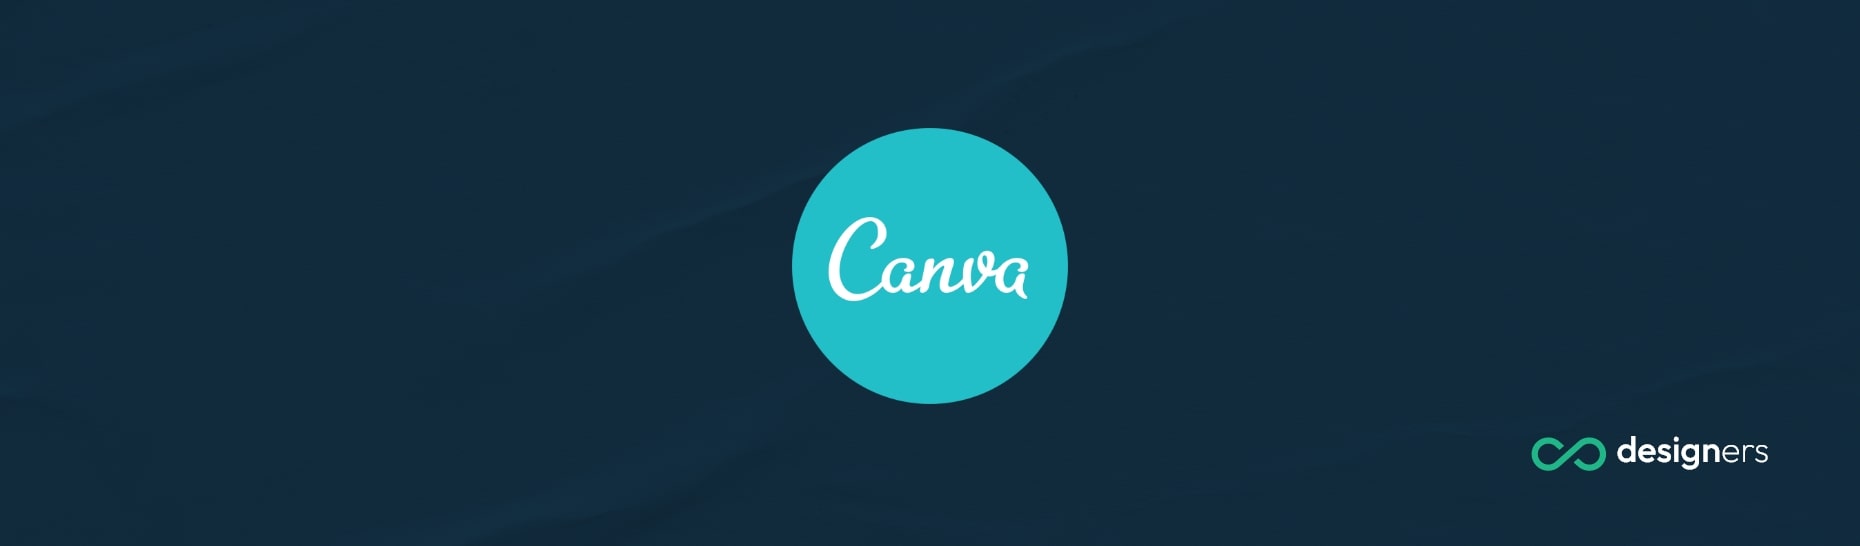 Is Adobe Spark Better Than Canva?